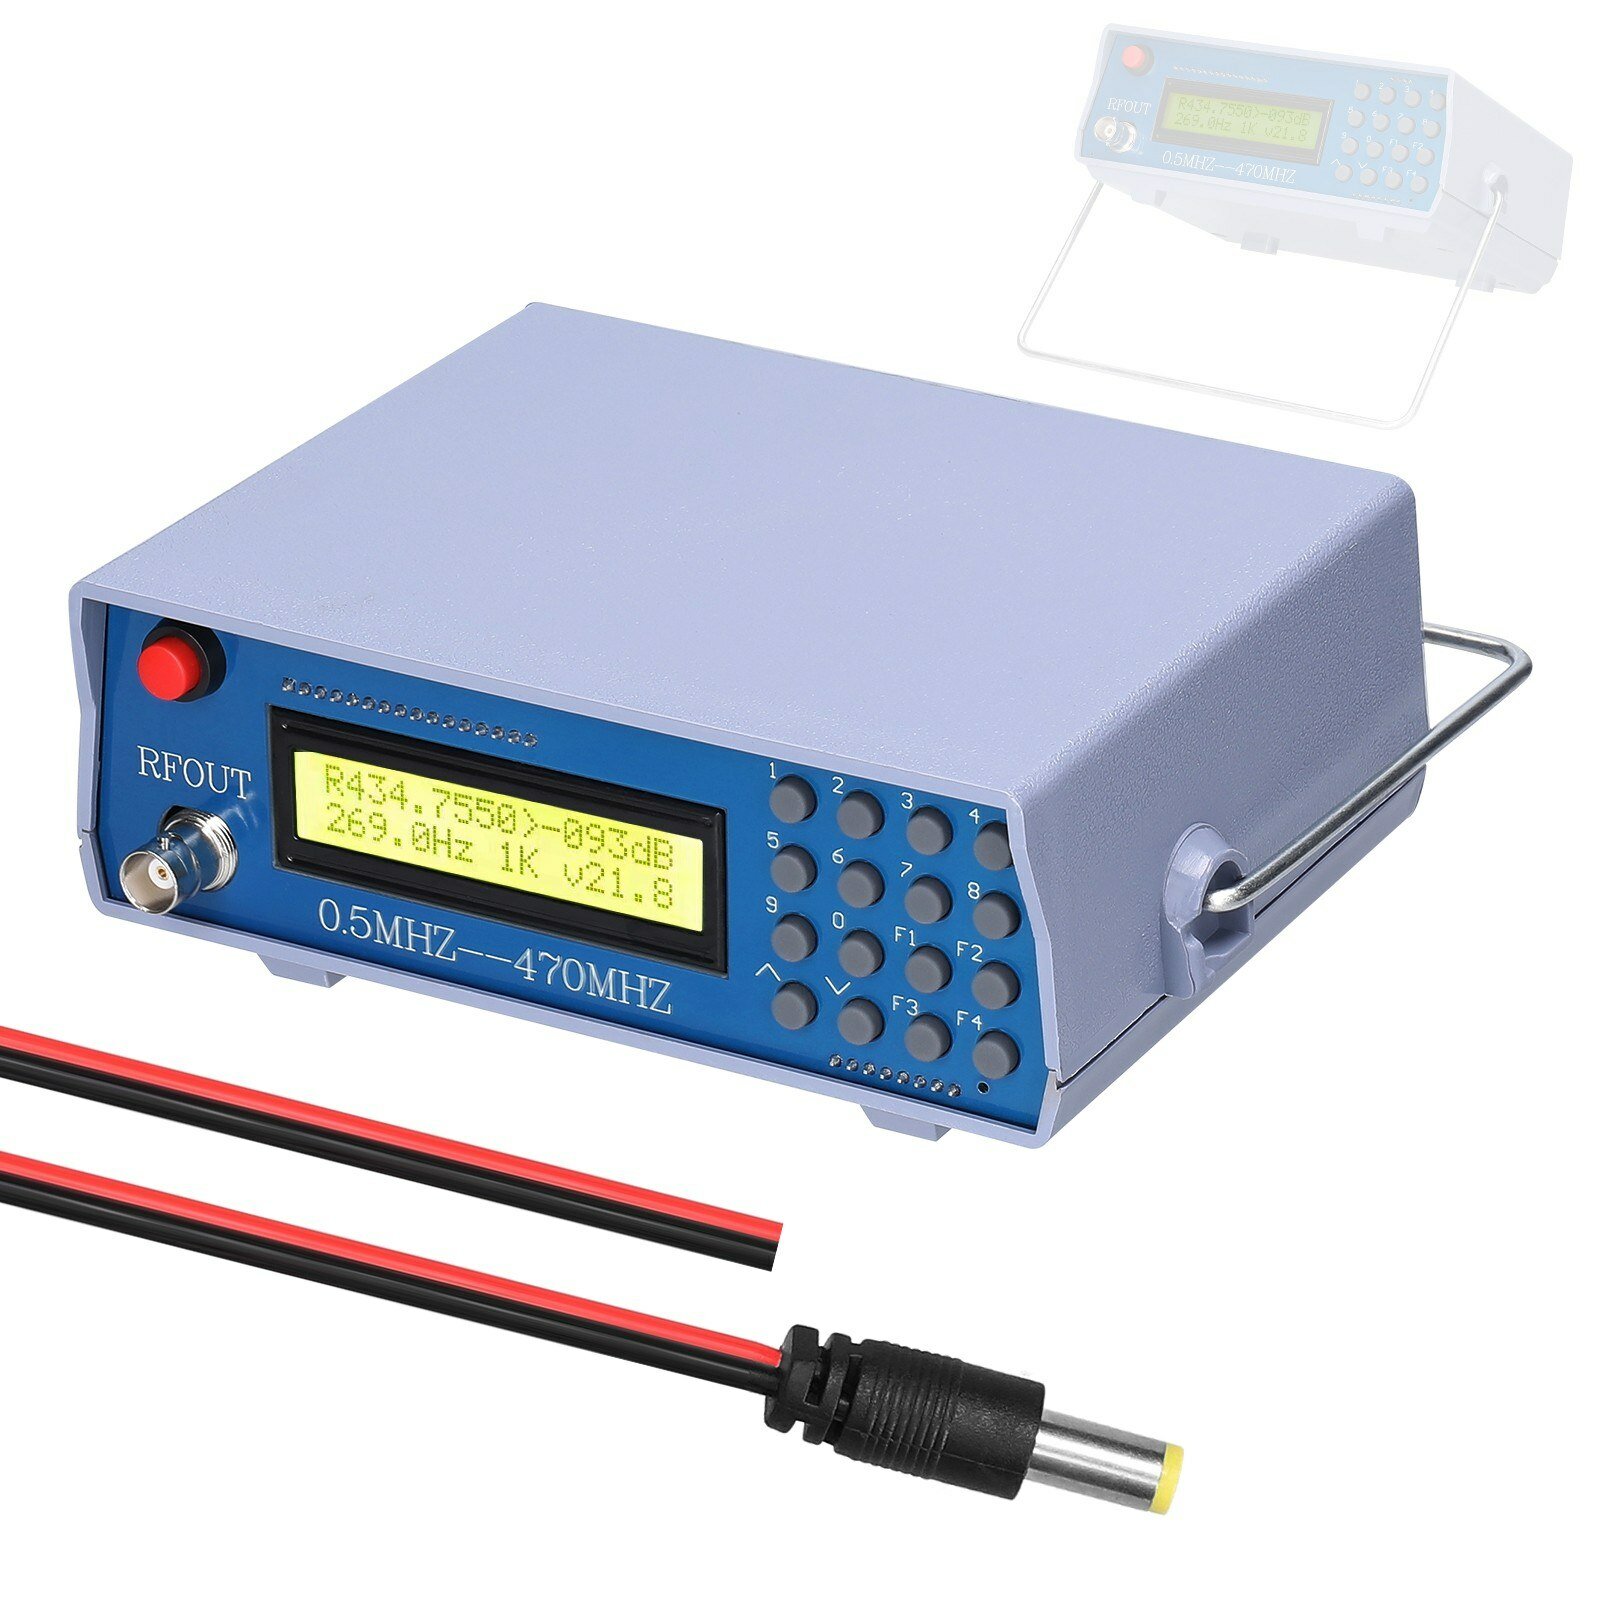 

0.5M-470M Radio Frequency Signal Source Generator Practical Debugging Instrument Tester for Frequency Modulation Interph